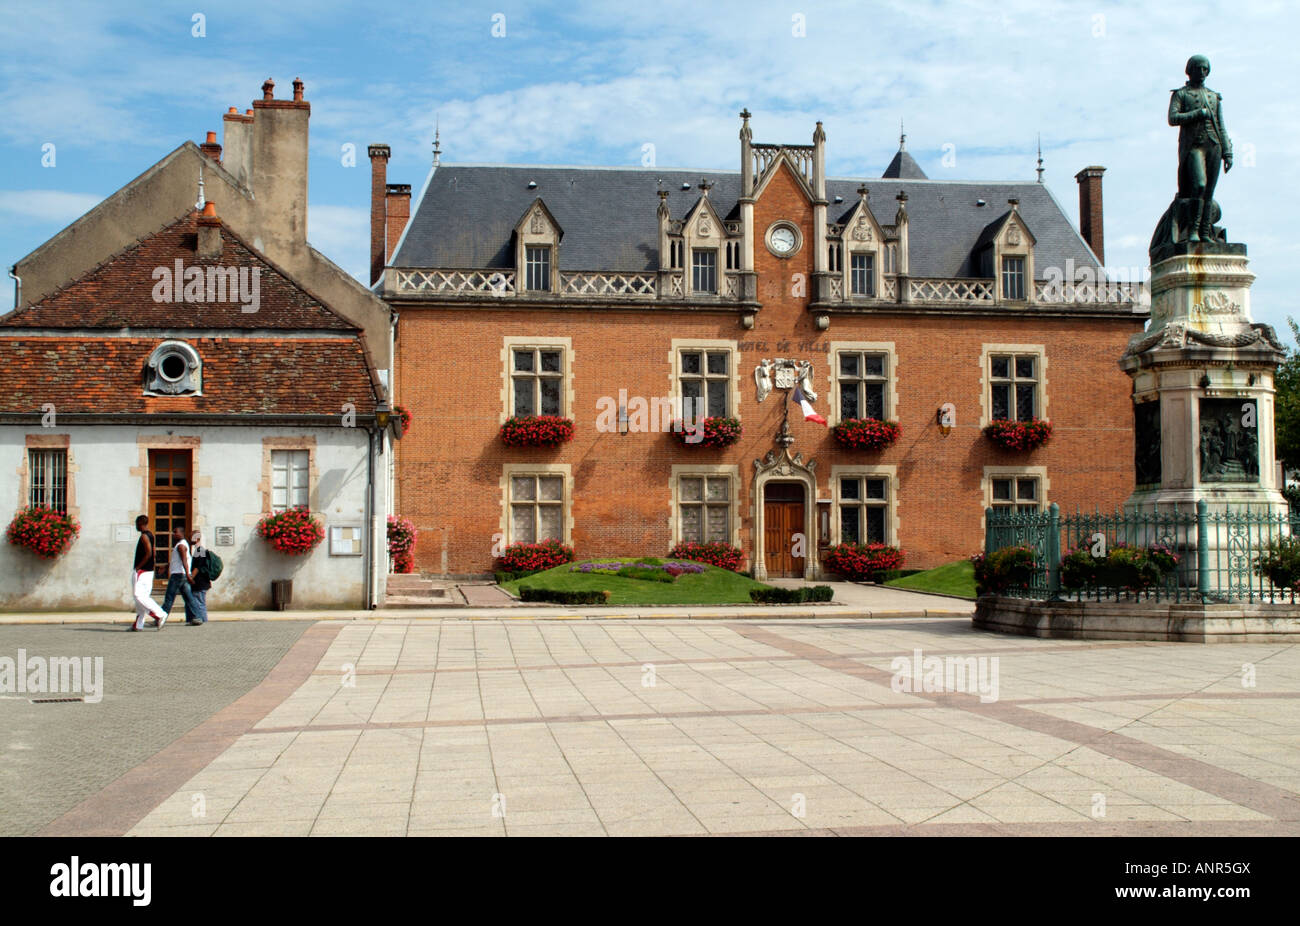 The Hotel de Ville at Auxonne in France Stock Photo